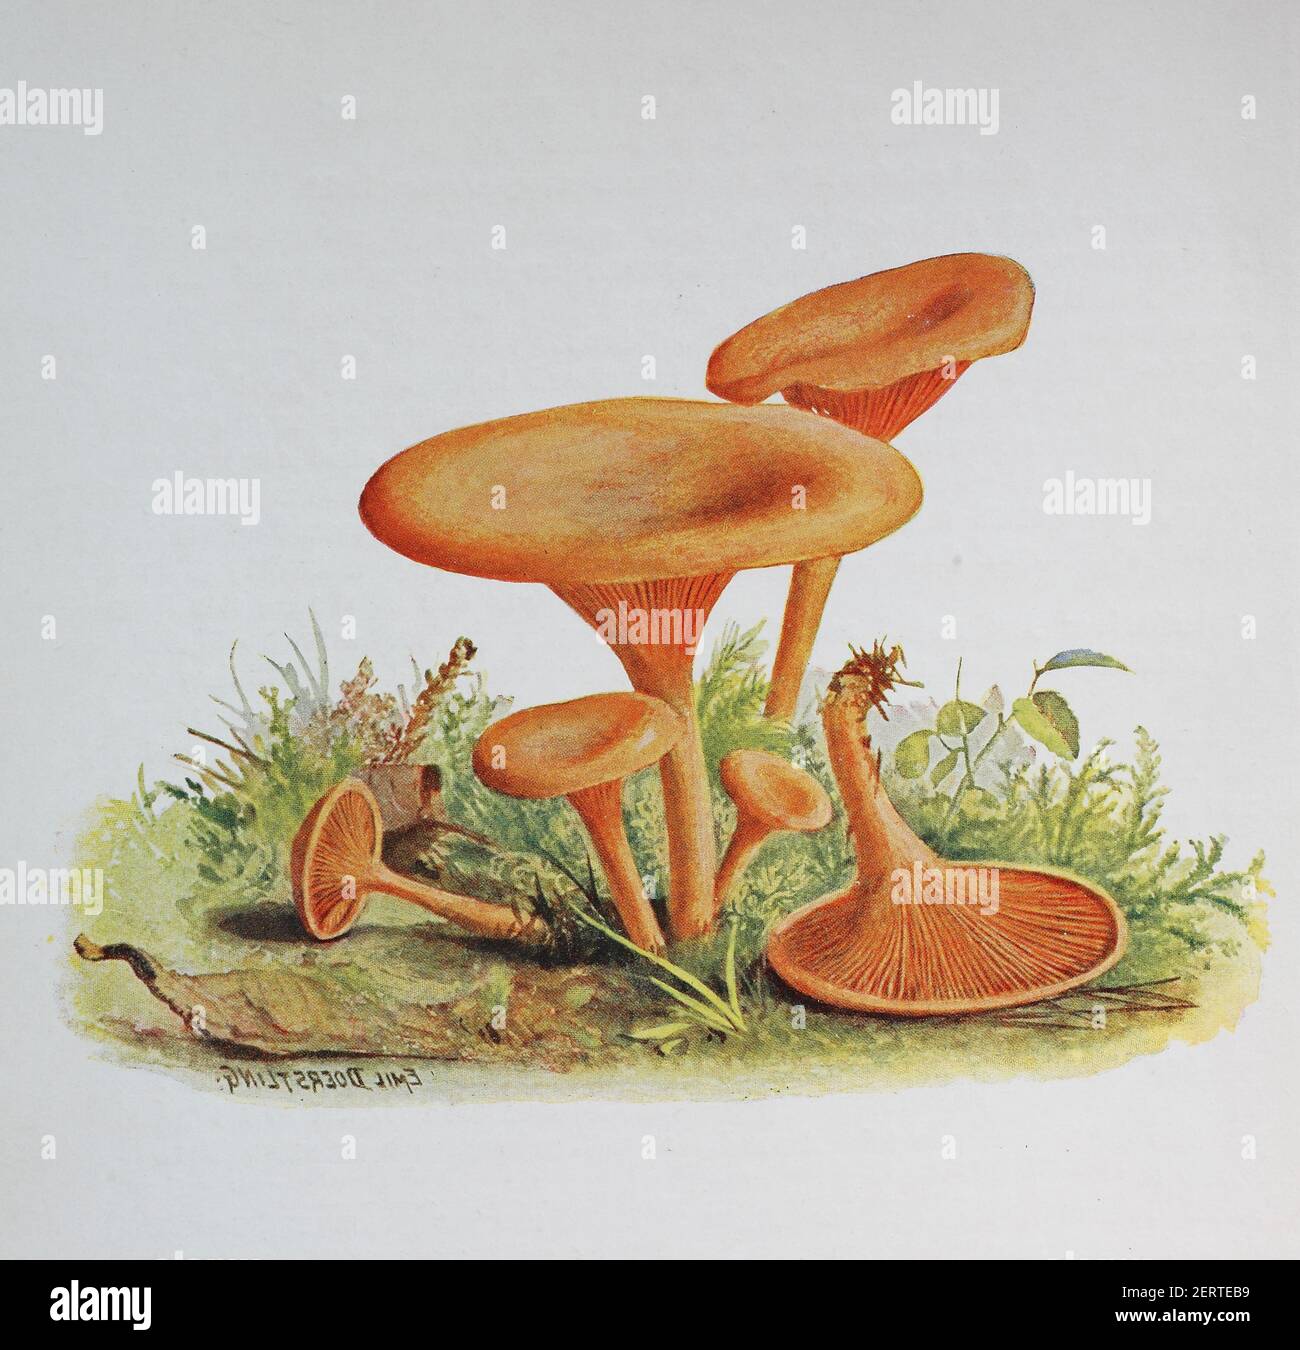 Hygrophoropsis aurantiaca, commonly known as the false chanterelle, digital reproduction of an ilustration of Emil Doerstling (1859-1940) Stock Photo